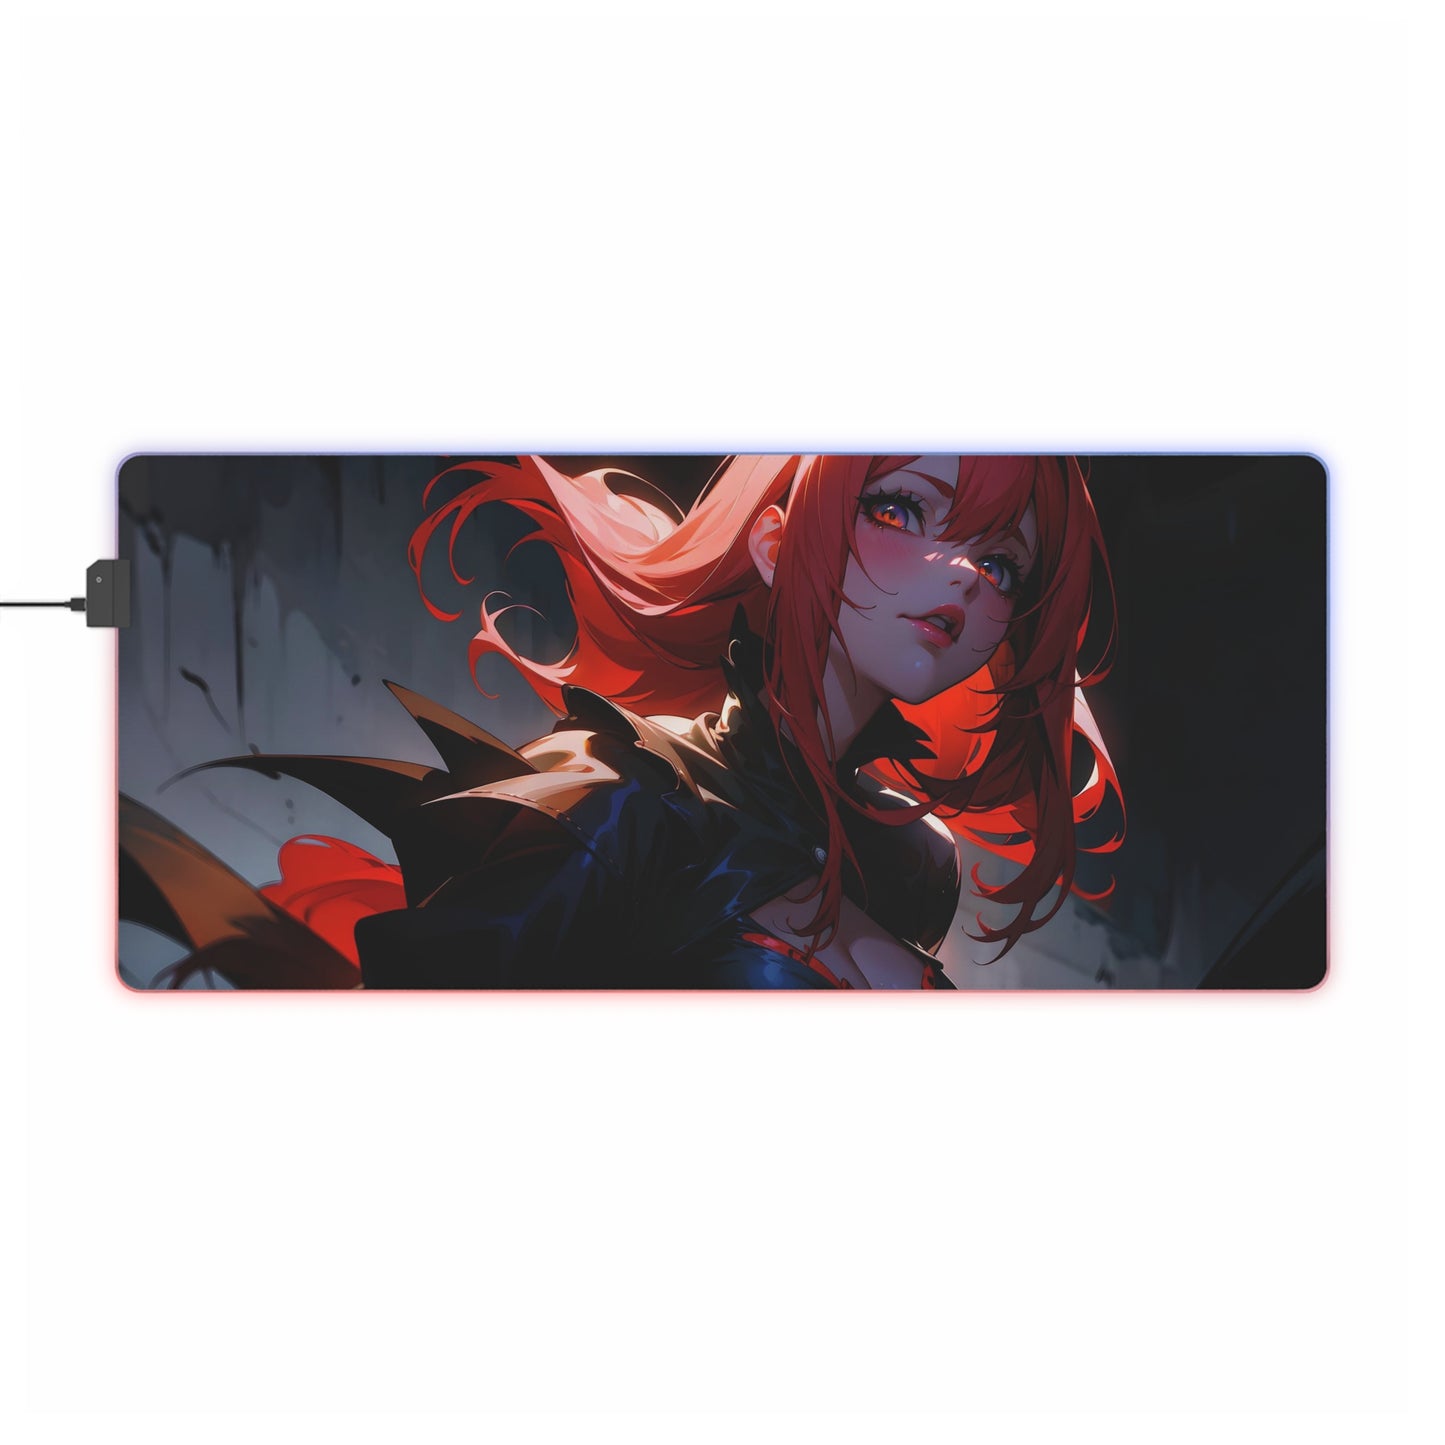 AG-17 LED Gaming Mouse Pad